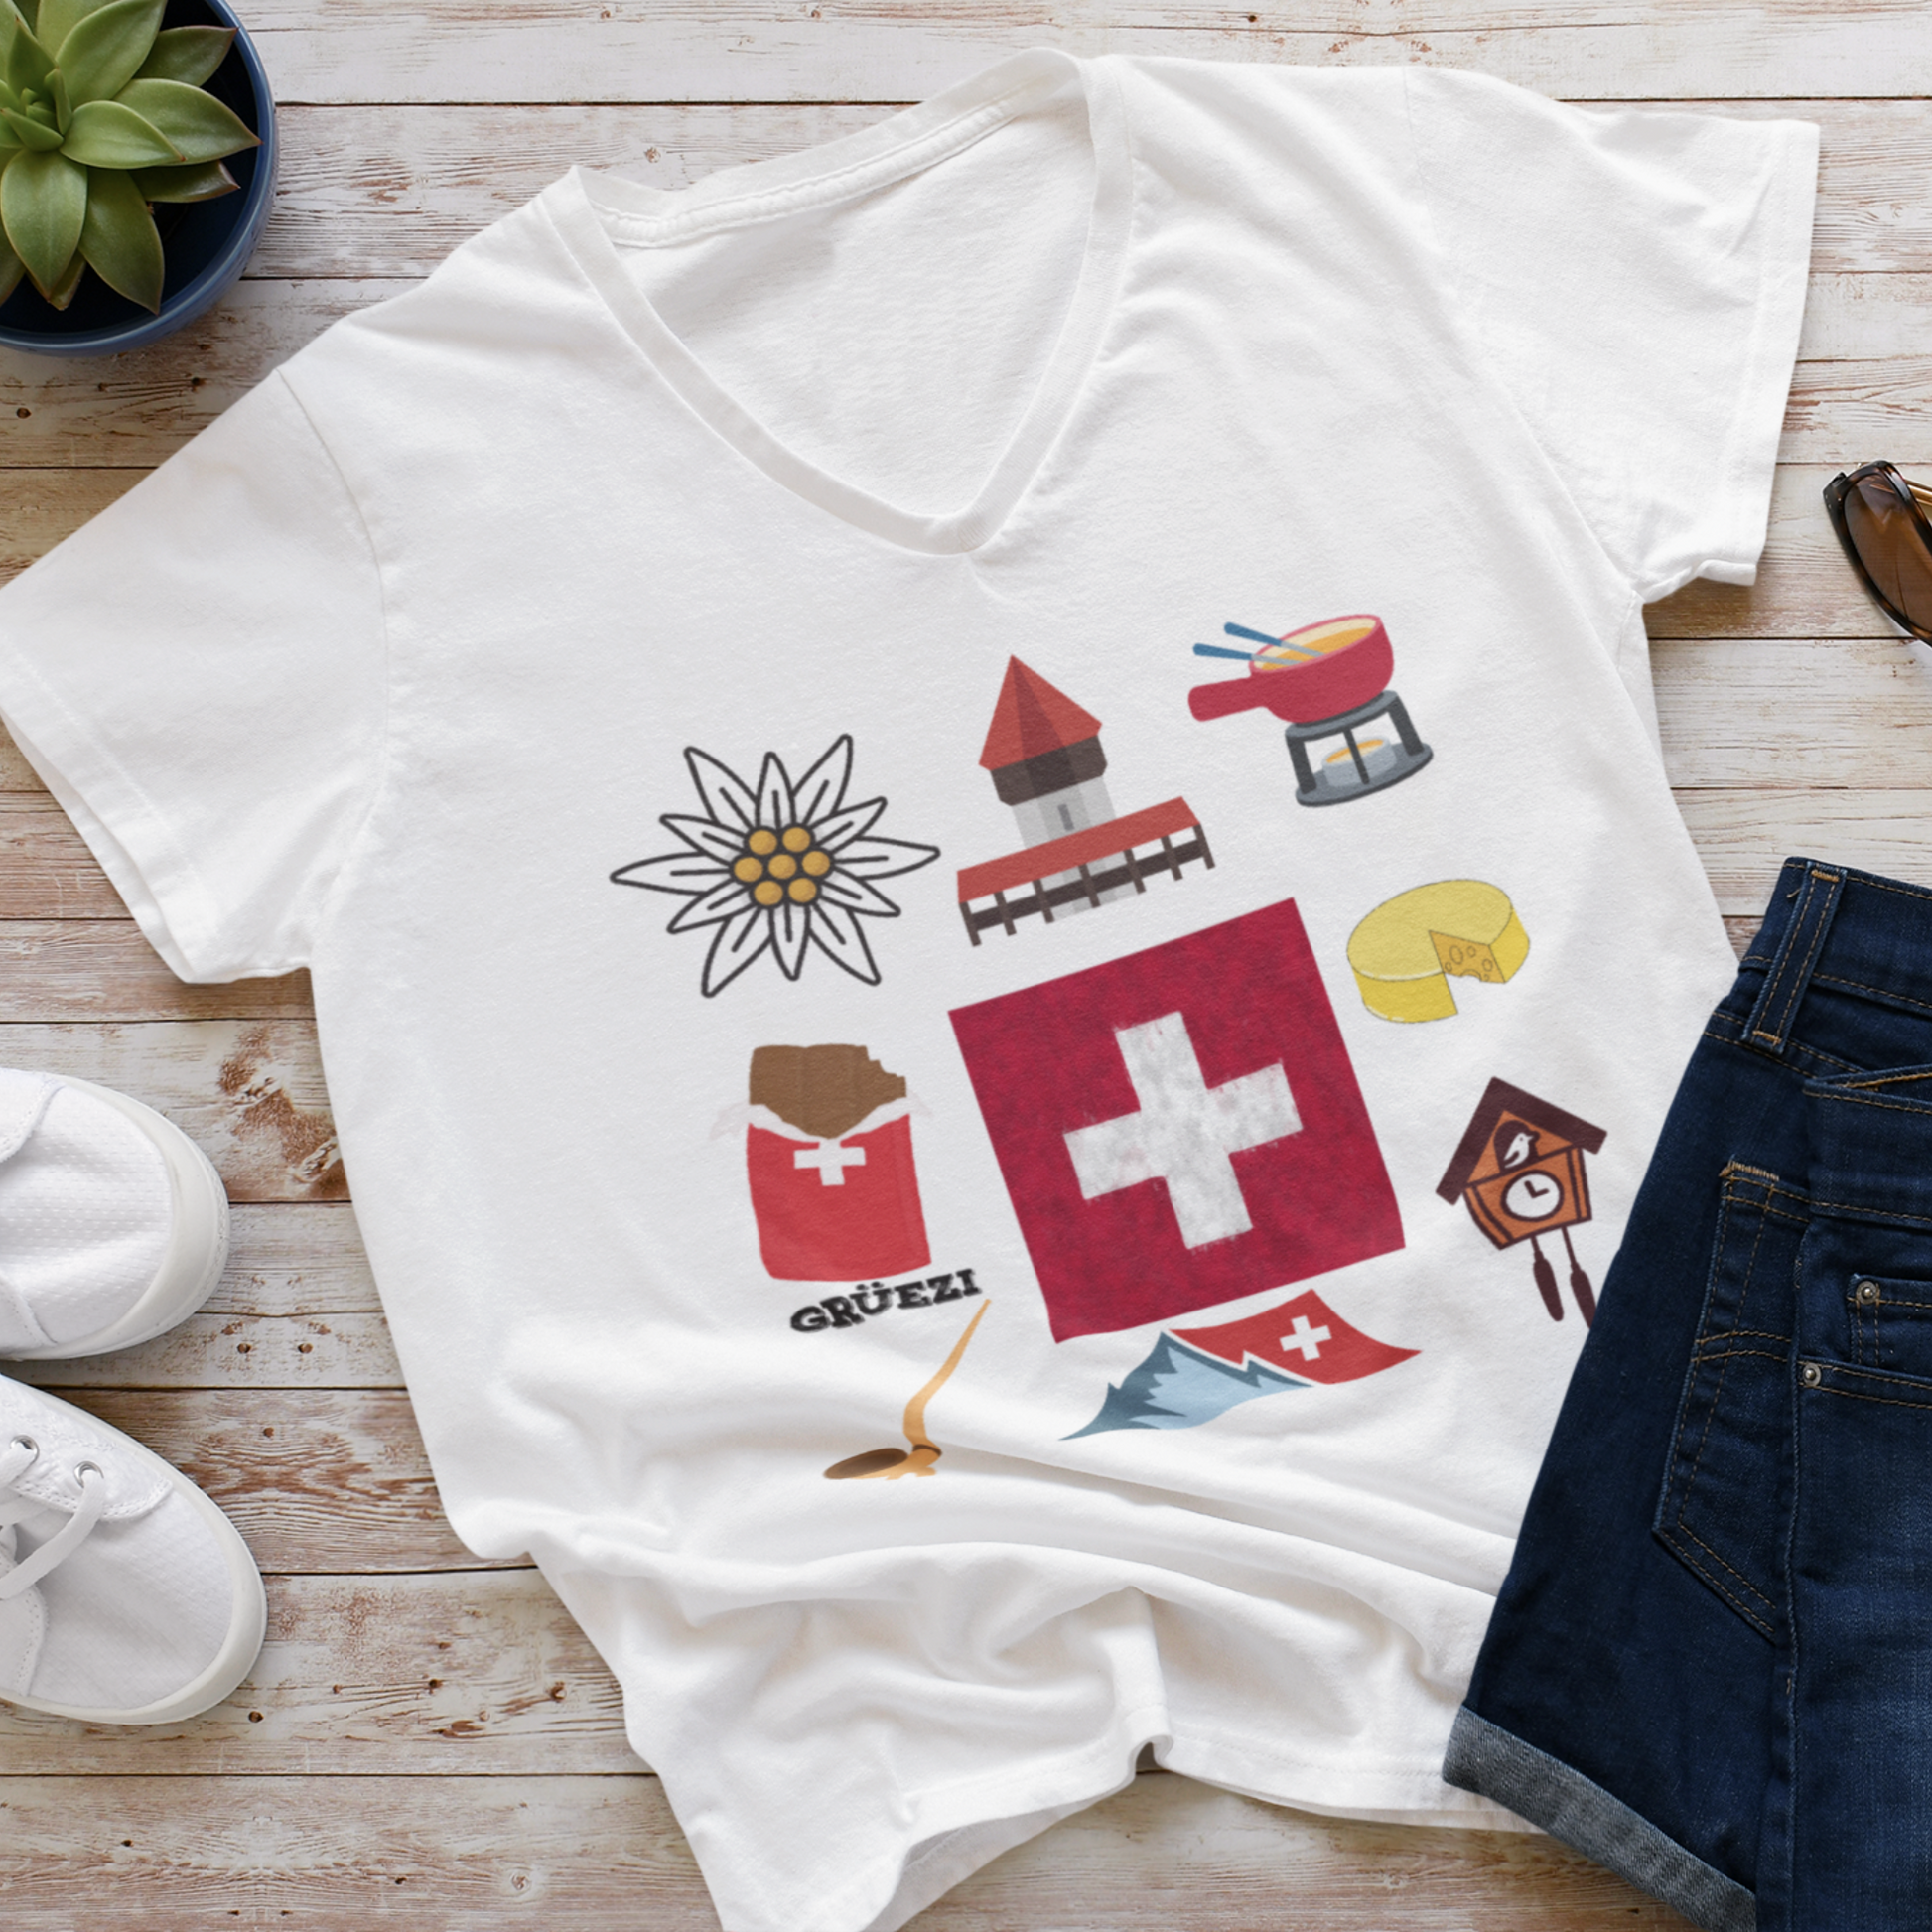 Stylish V-Neck Tee Featuring Swiss Flag, Lucerne Bridge, and More